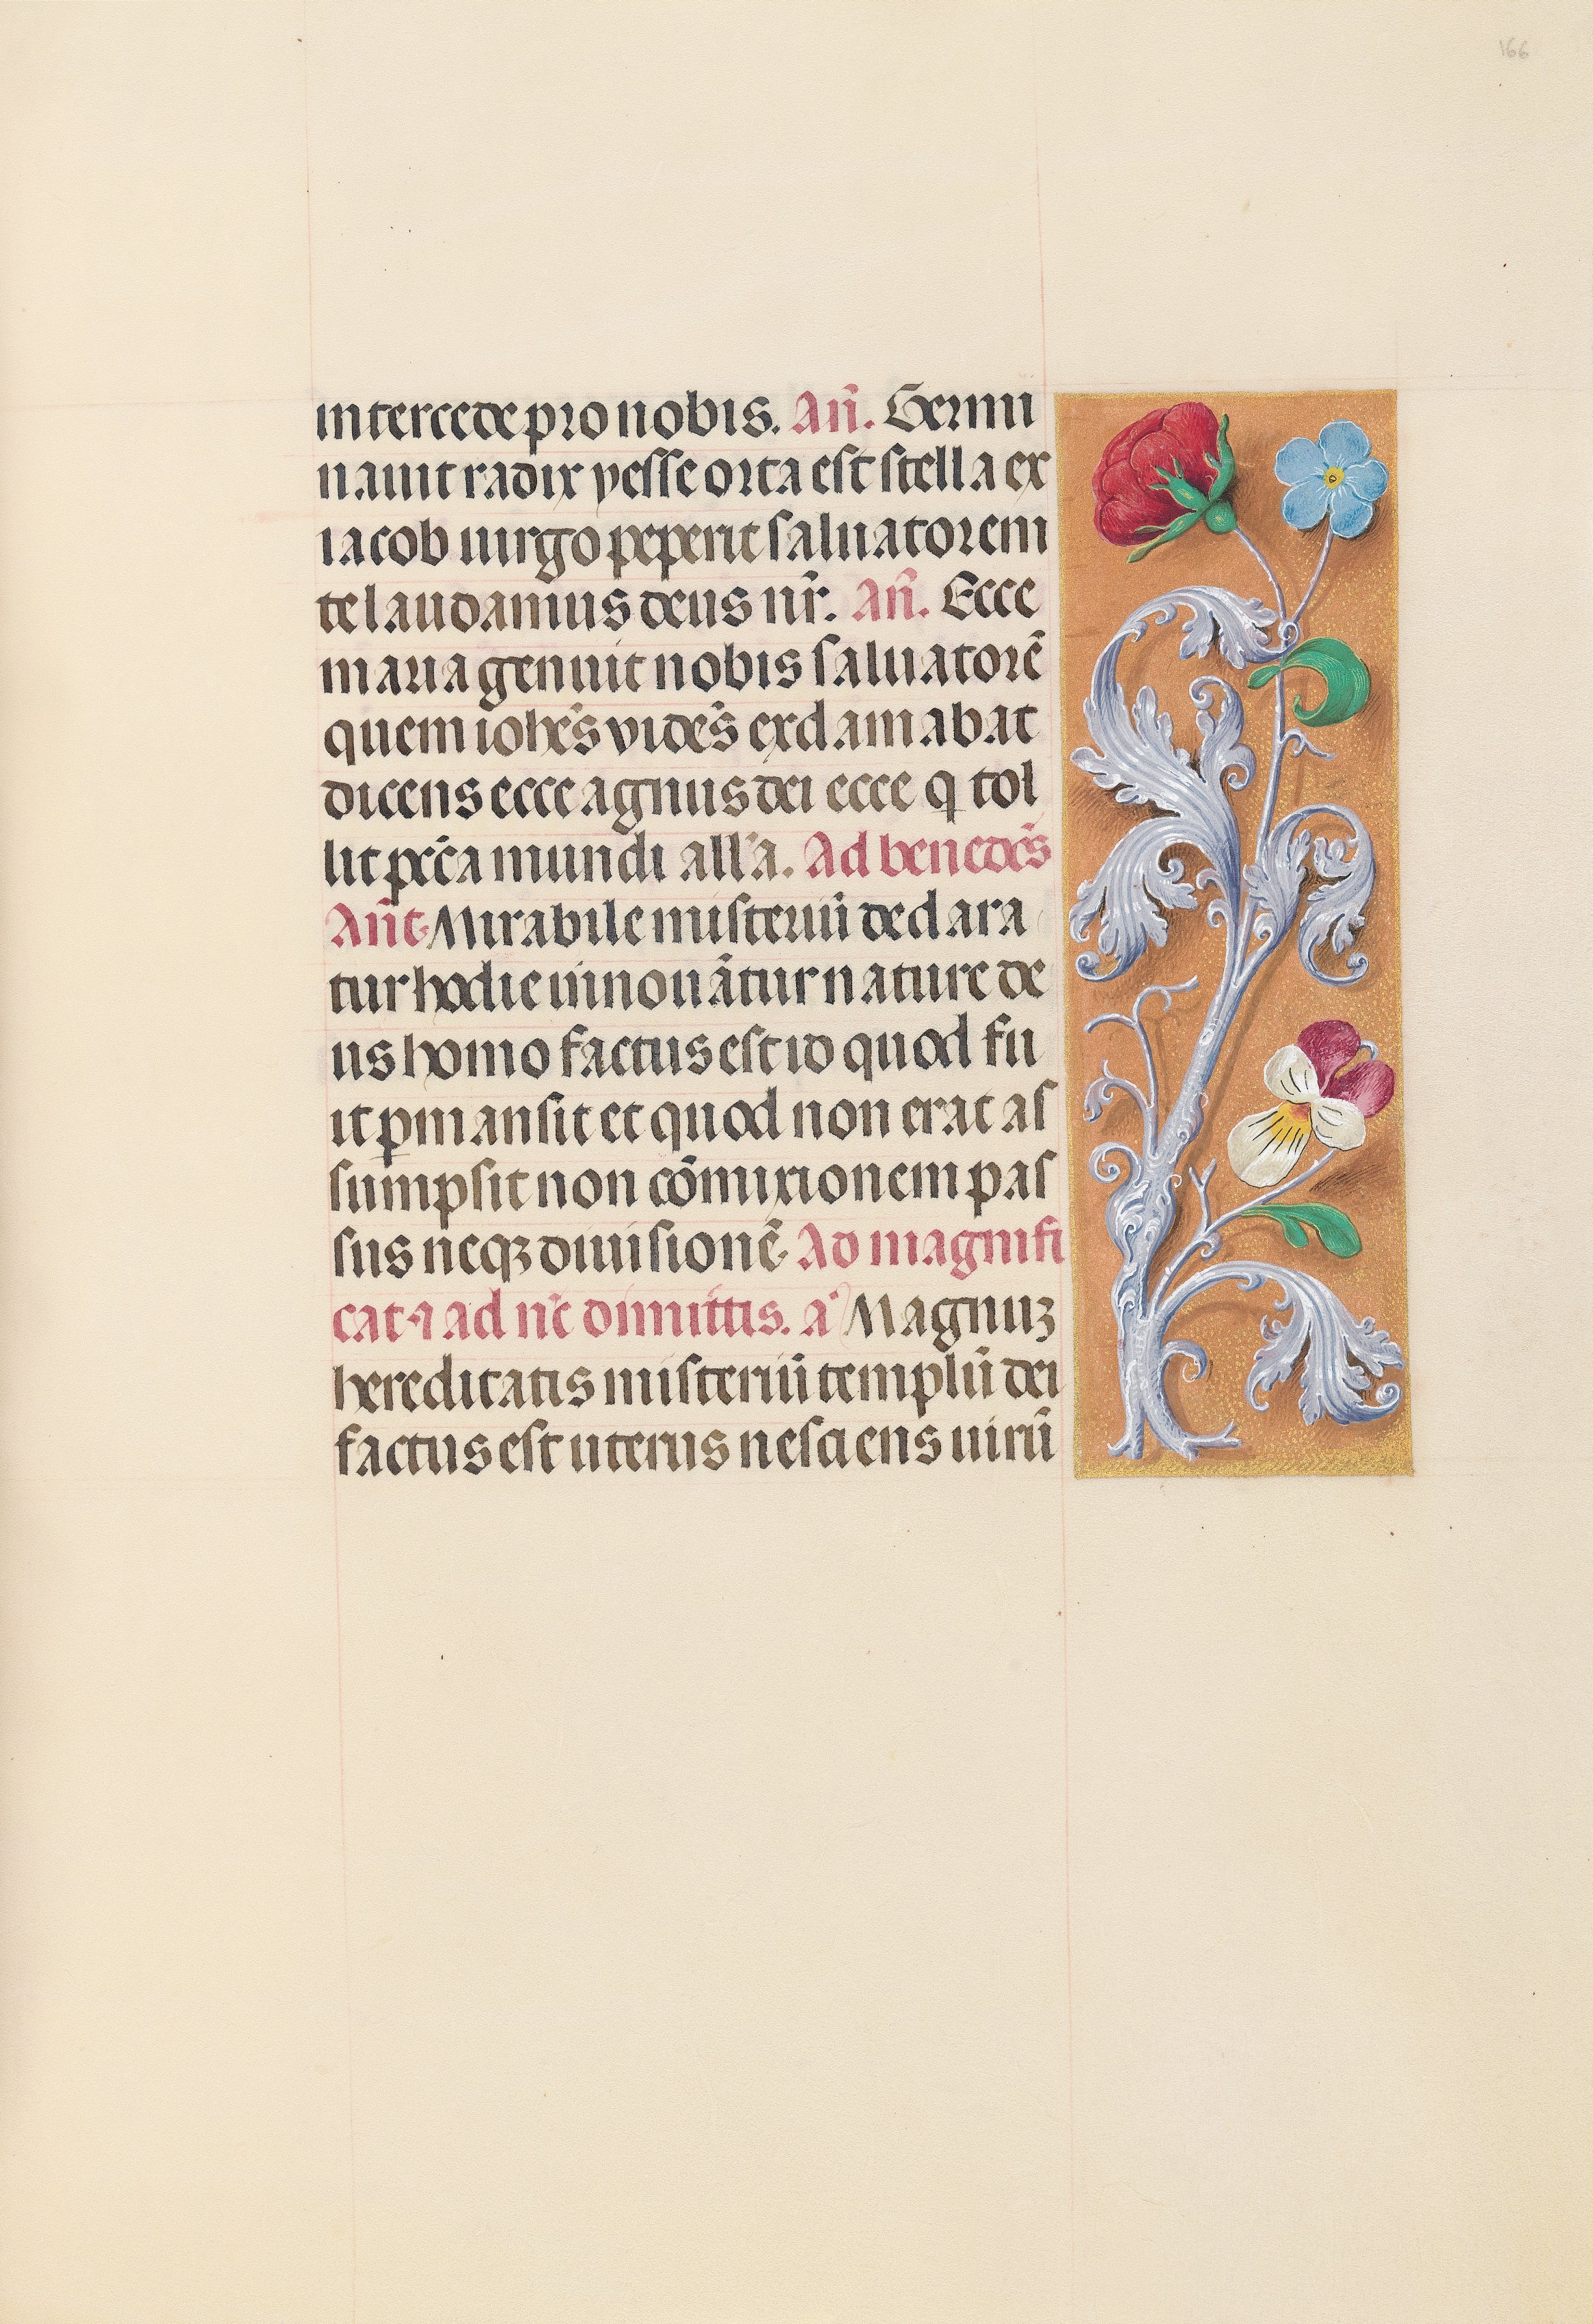 Hours of Queen Isabella the Catholic, Queen of Spain:  Fol. 166r